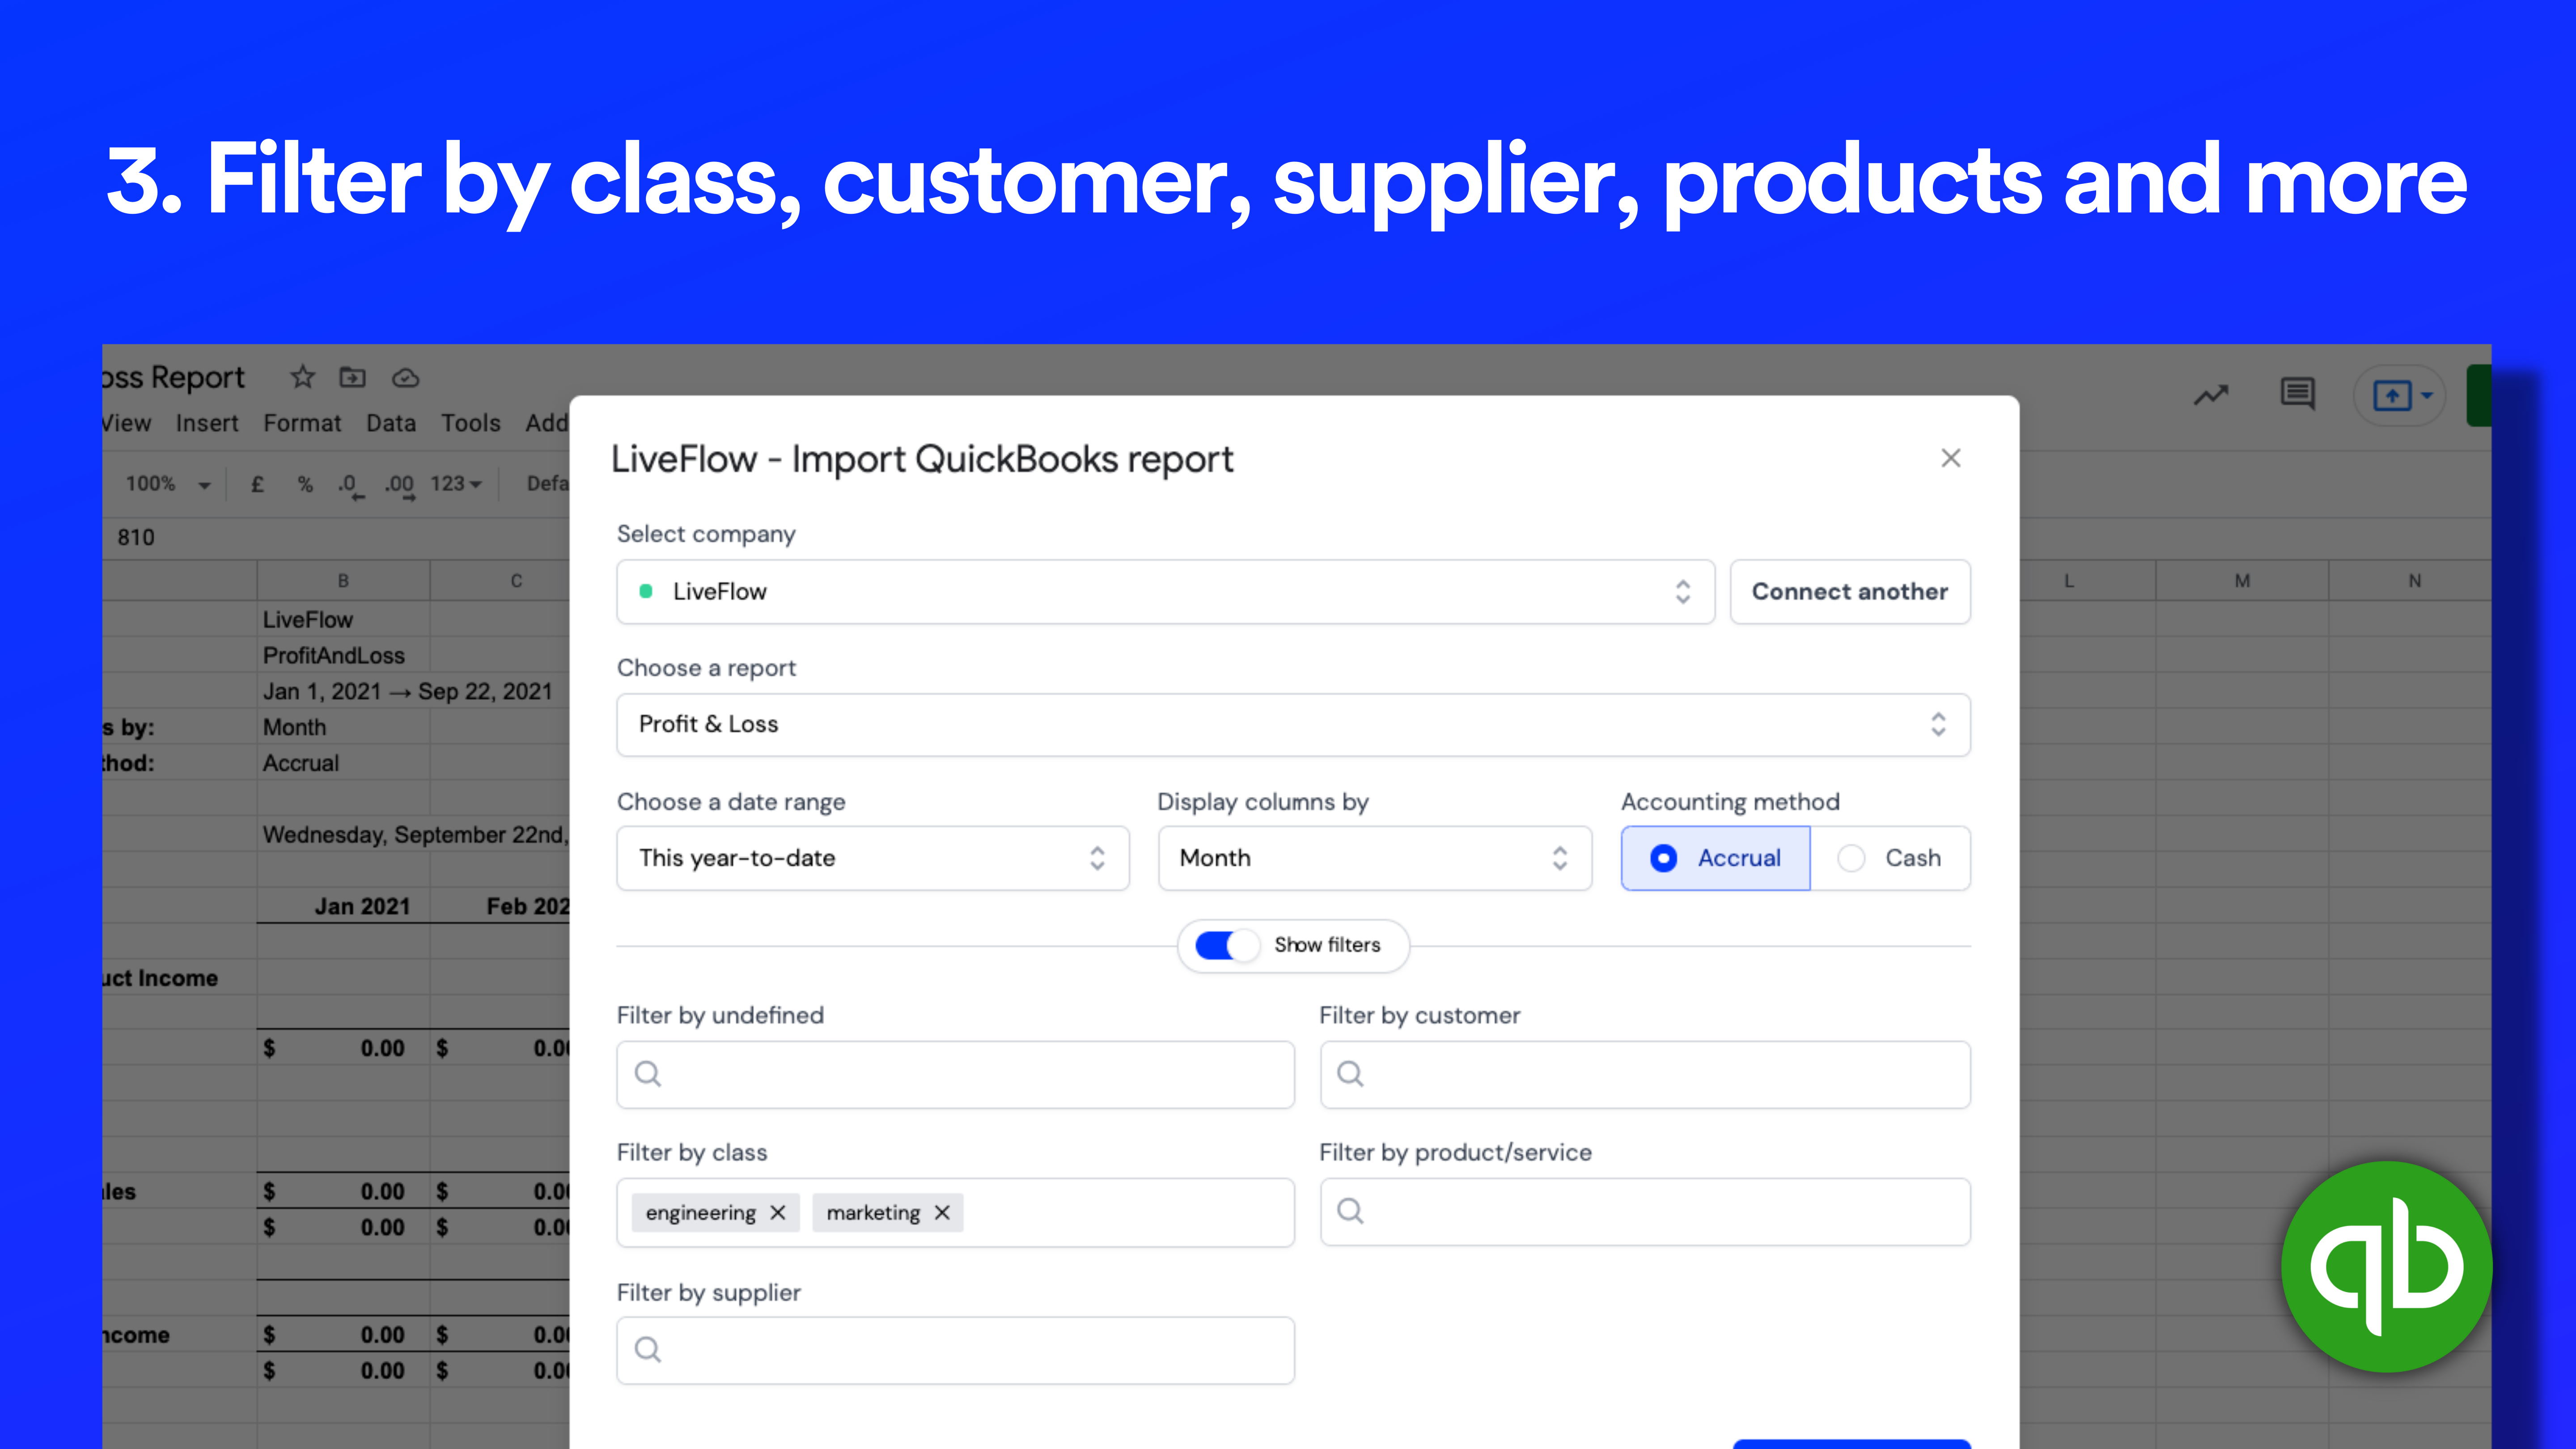 LiveFlow Software - Filter by class, customer, supplier, products and more